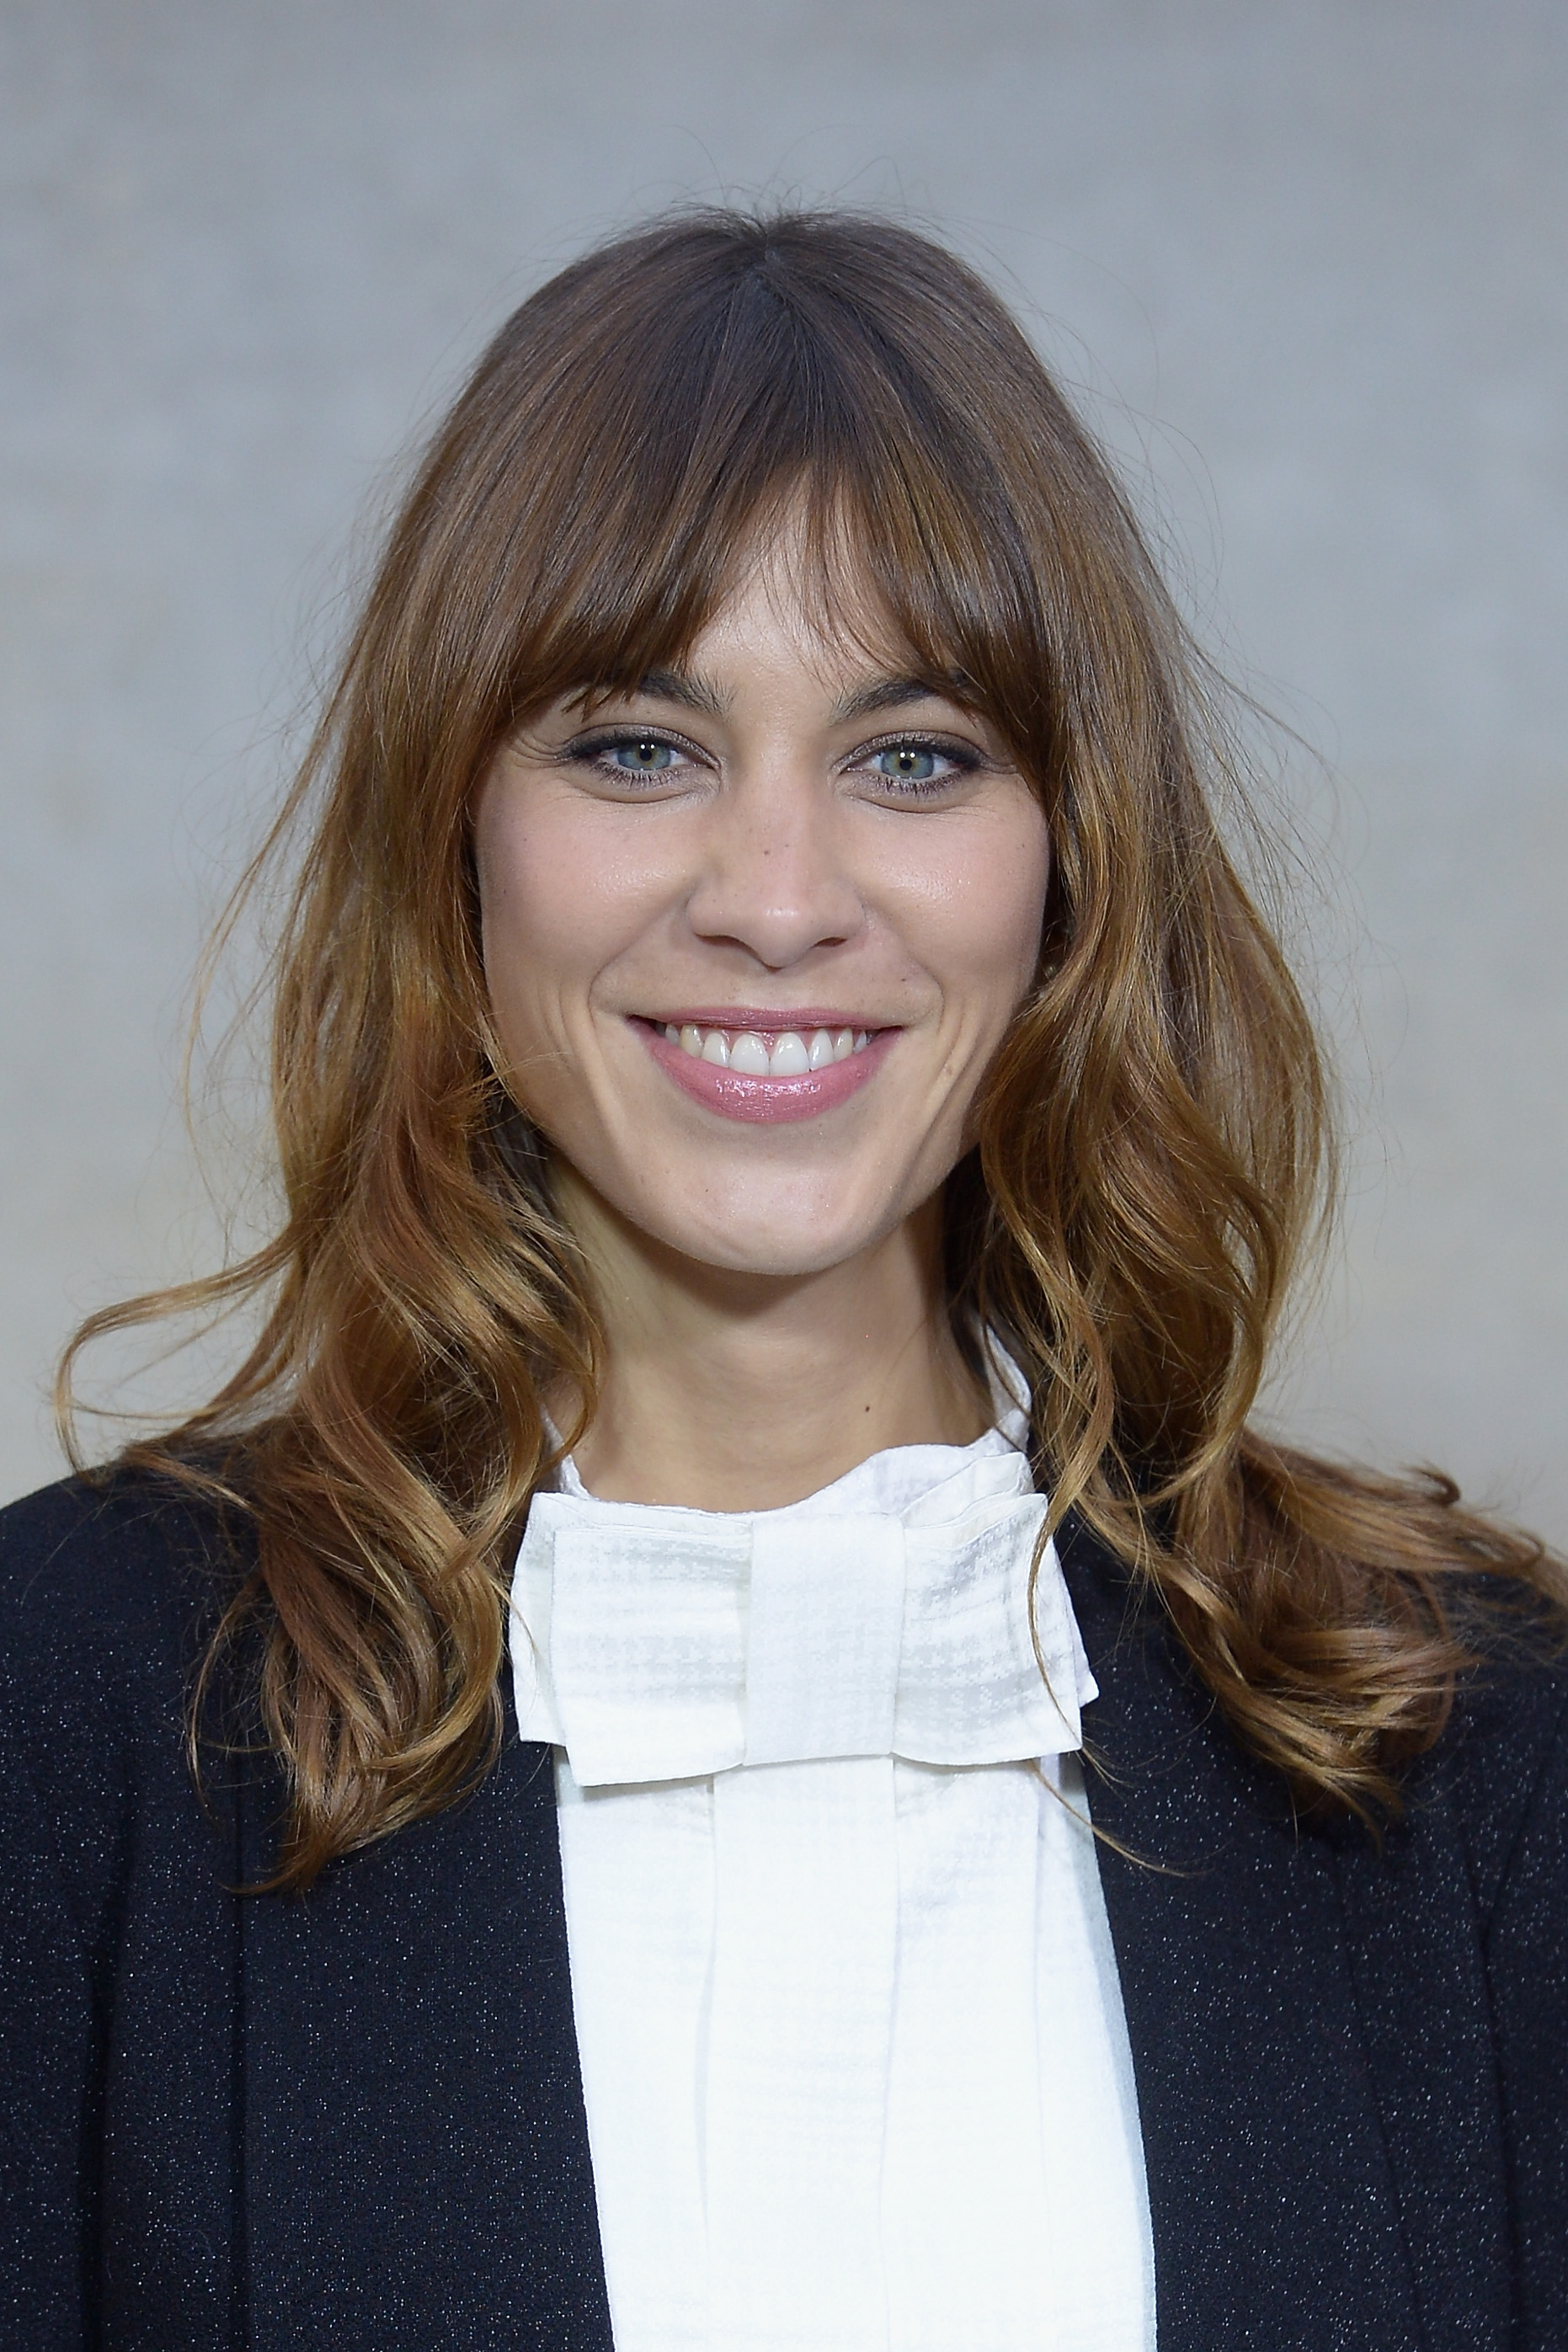 PARIS, FRANCE - SEPTEMBER 30: Alexa Chung attends the Chanel show as part of the Paris Fashion Week Womenswear Spring/Summer 2015 on September 30, 2014 in Paris, France. (Photo by Dominique Charriau/WireImage)